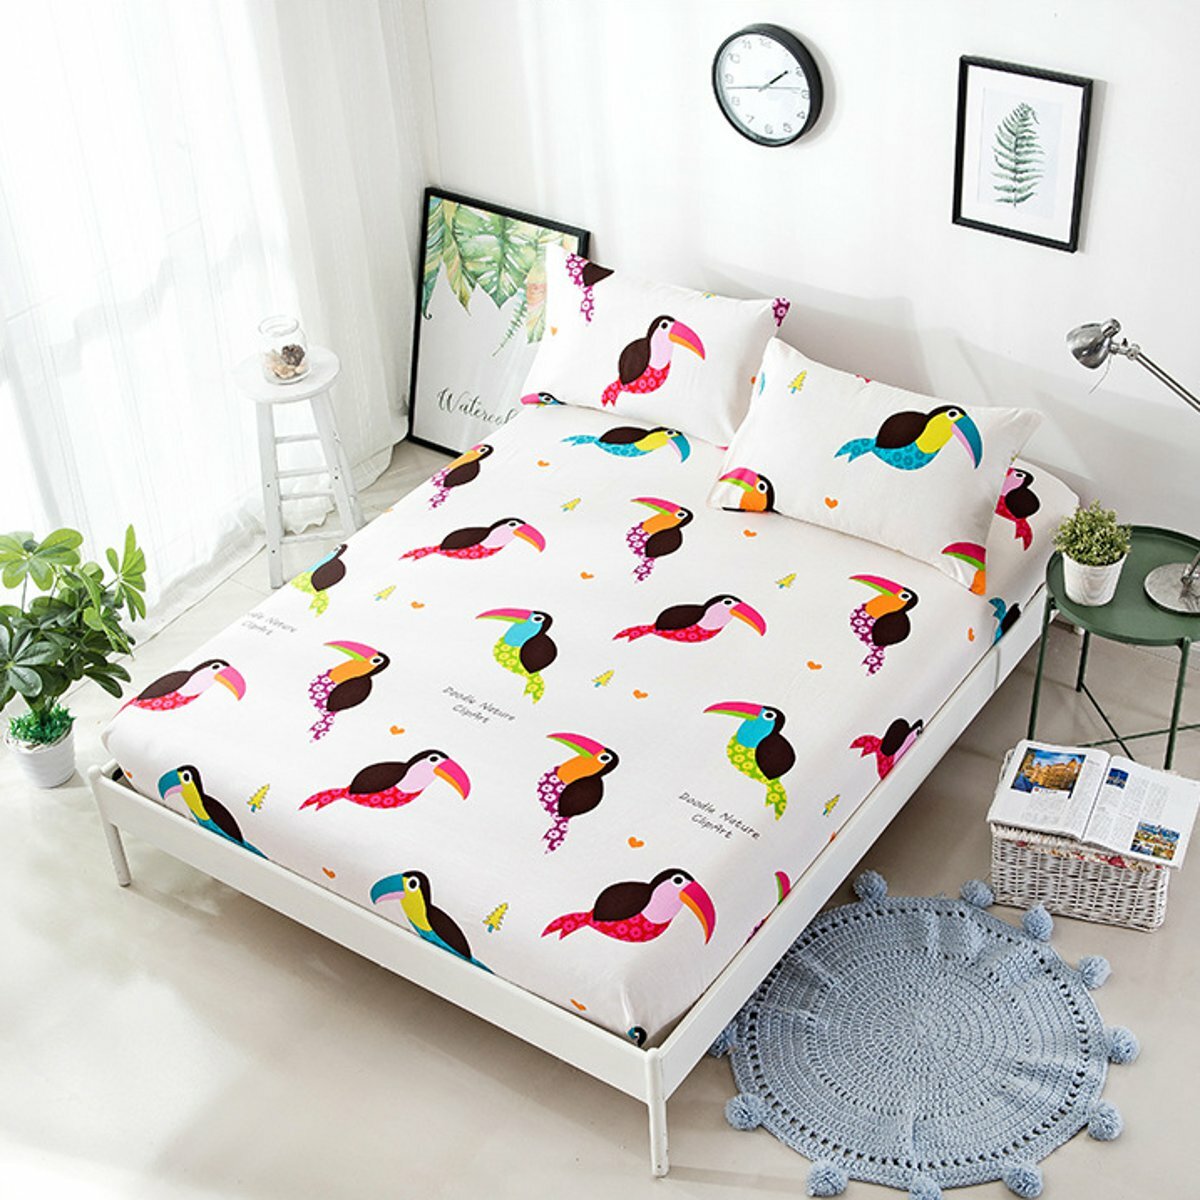 New Fitted Sheet Bird Printed Twin Full Queen King Cotton Bed Sheet Cover 3 Size